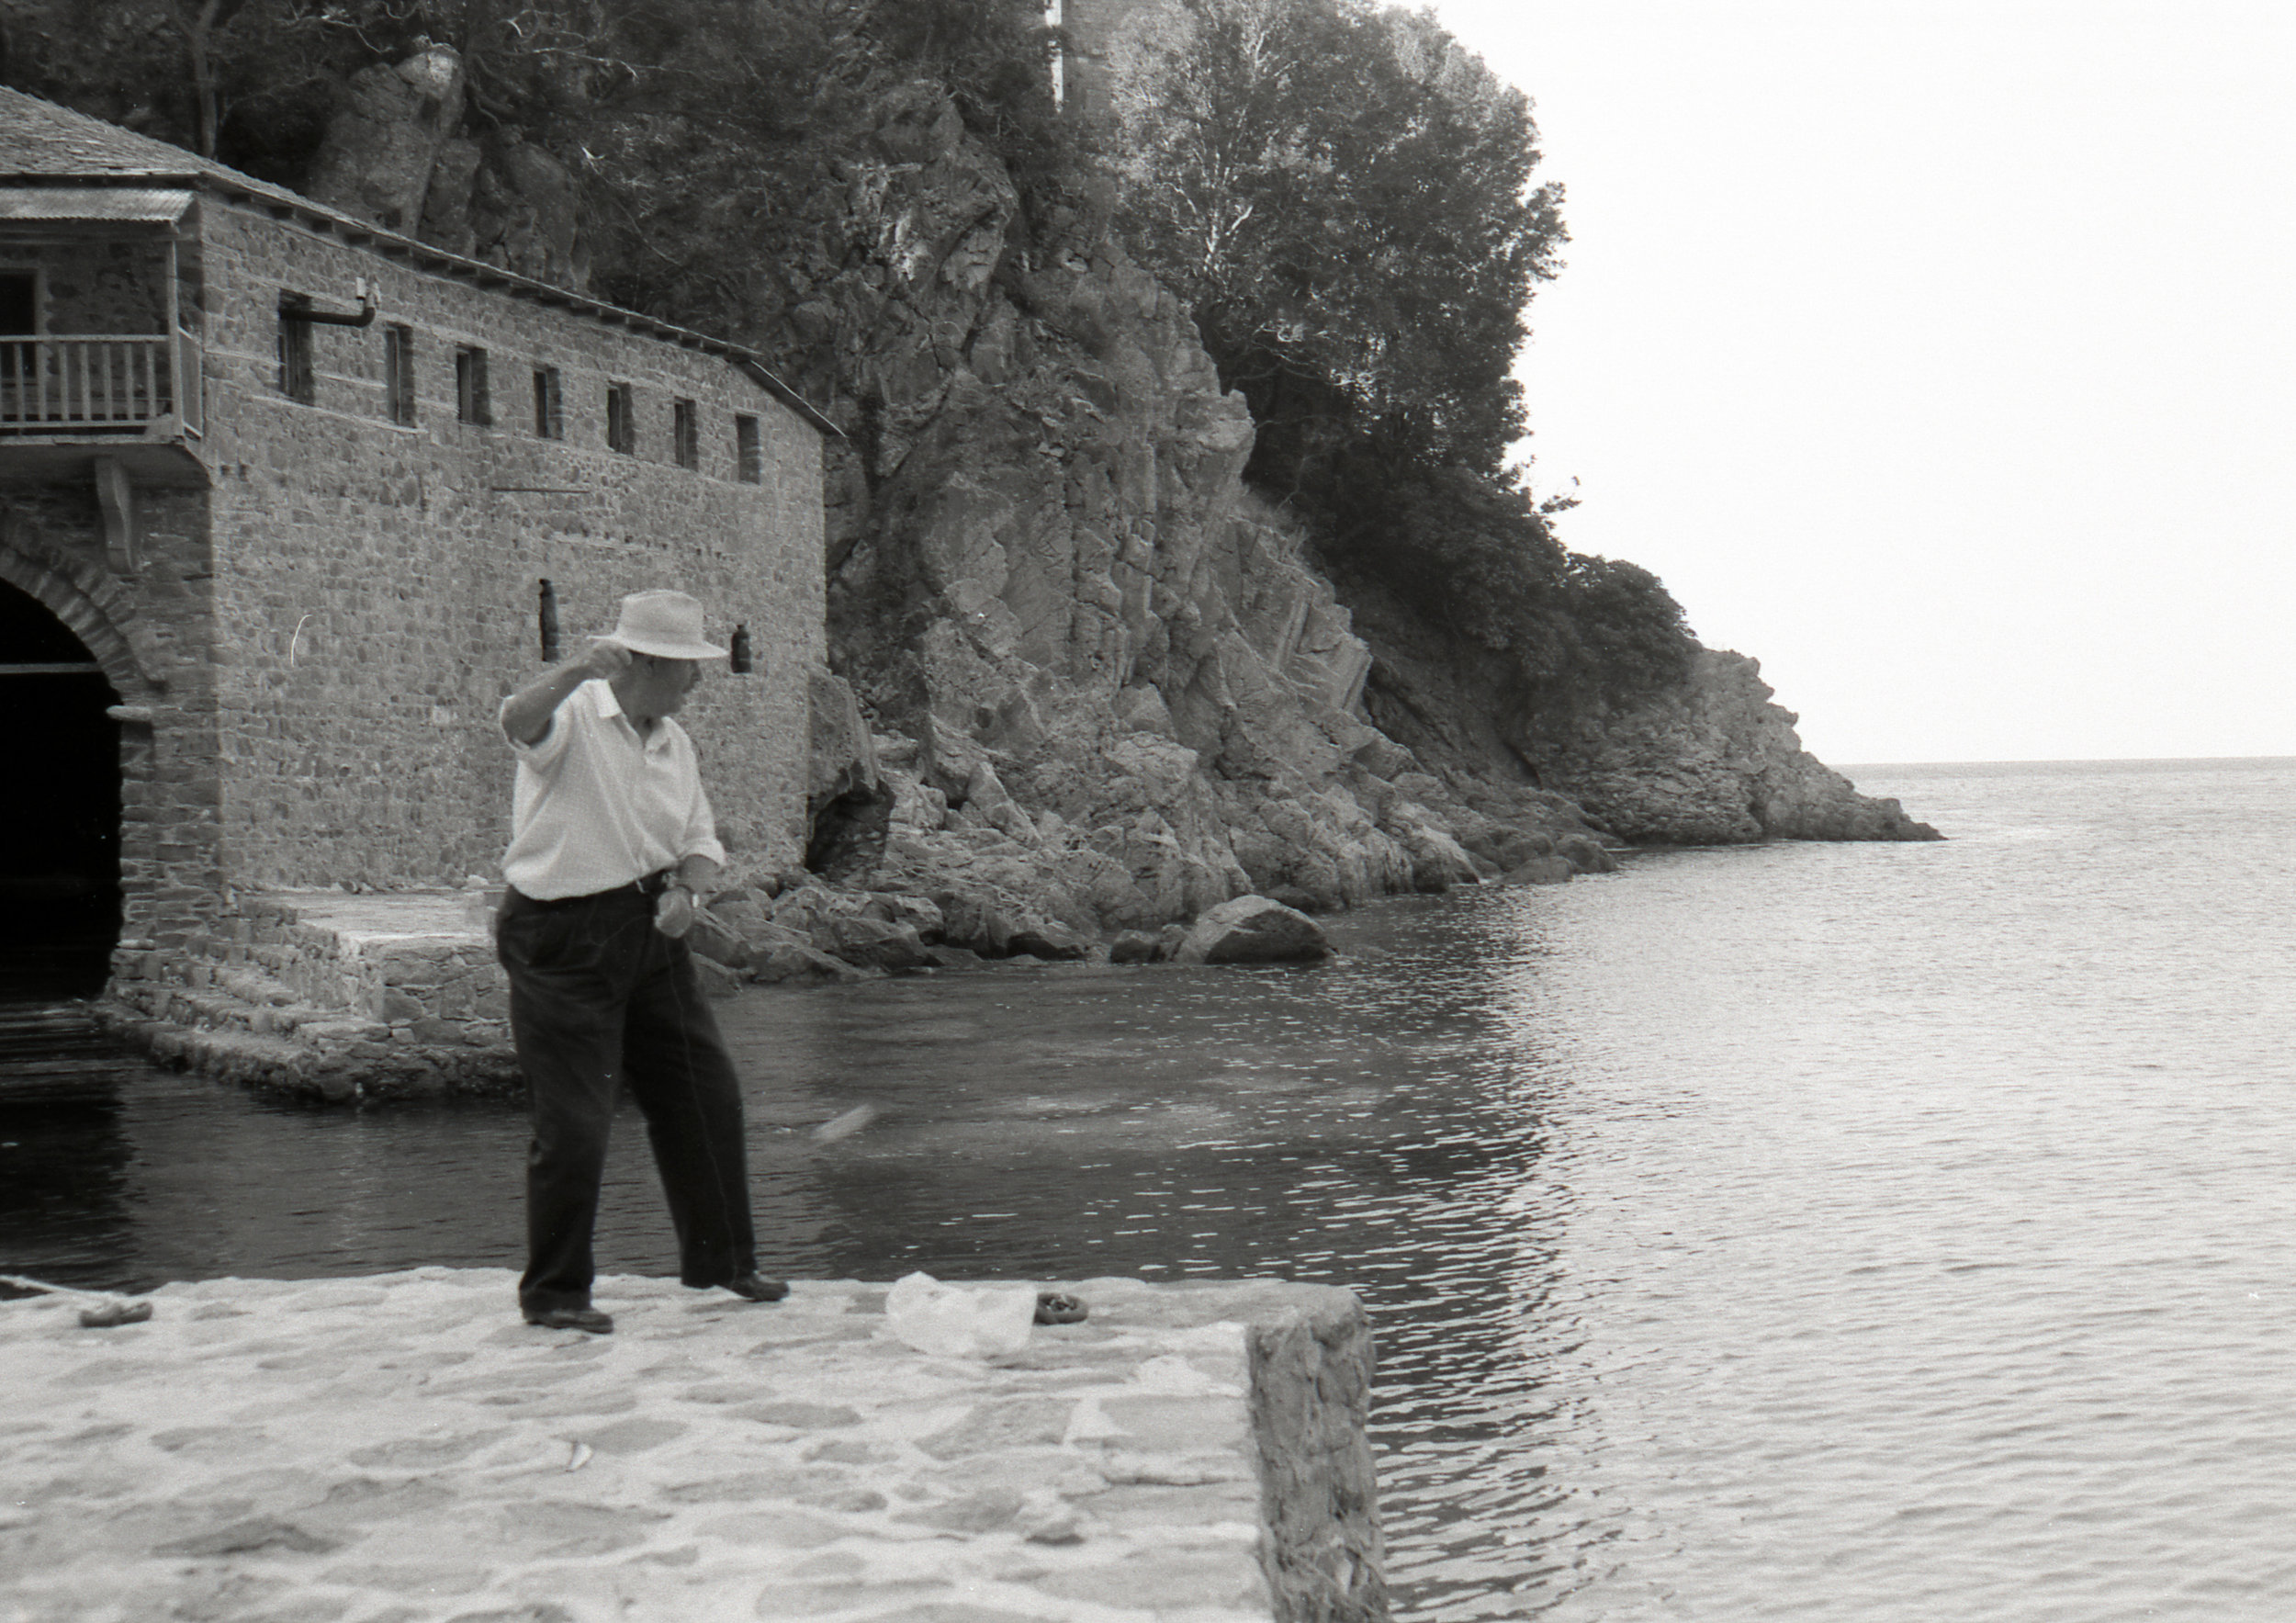 A man fishes at Mt Athos